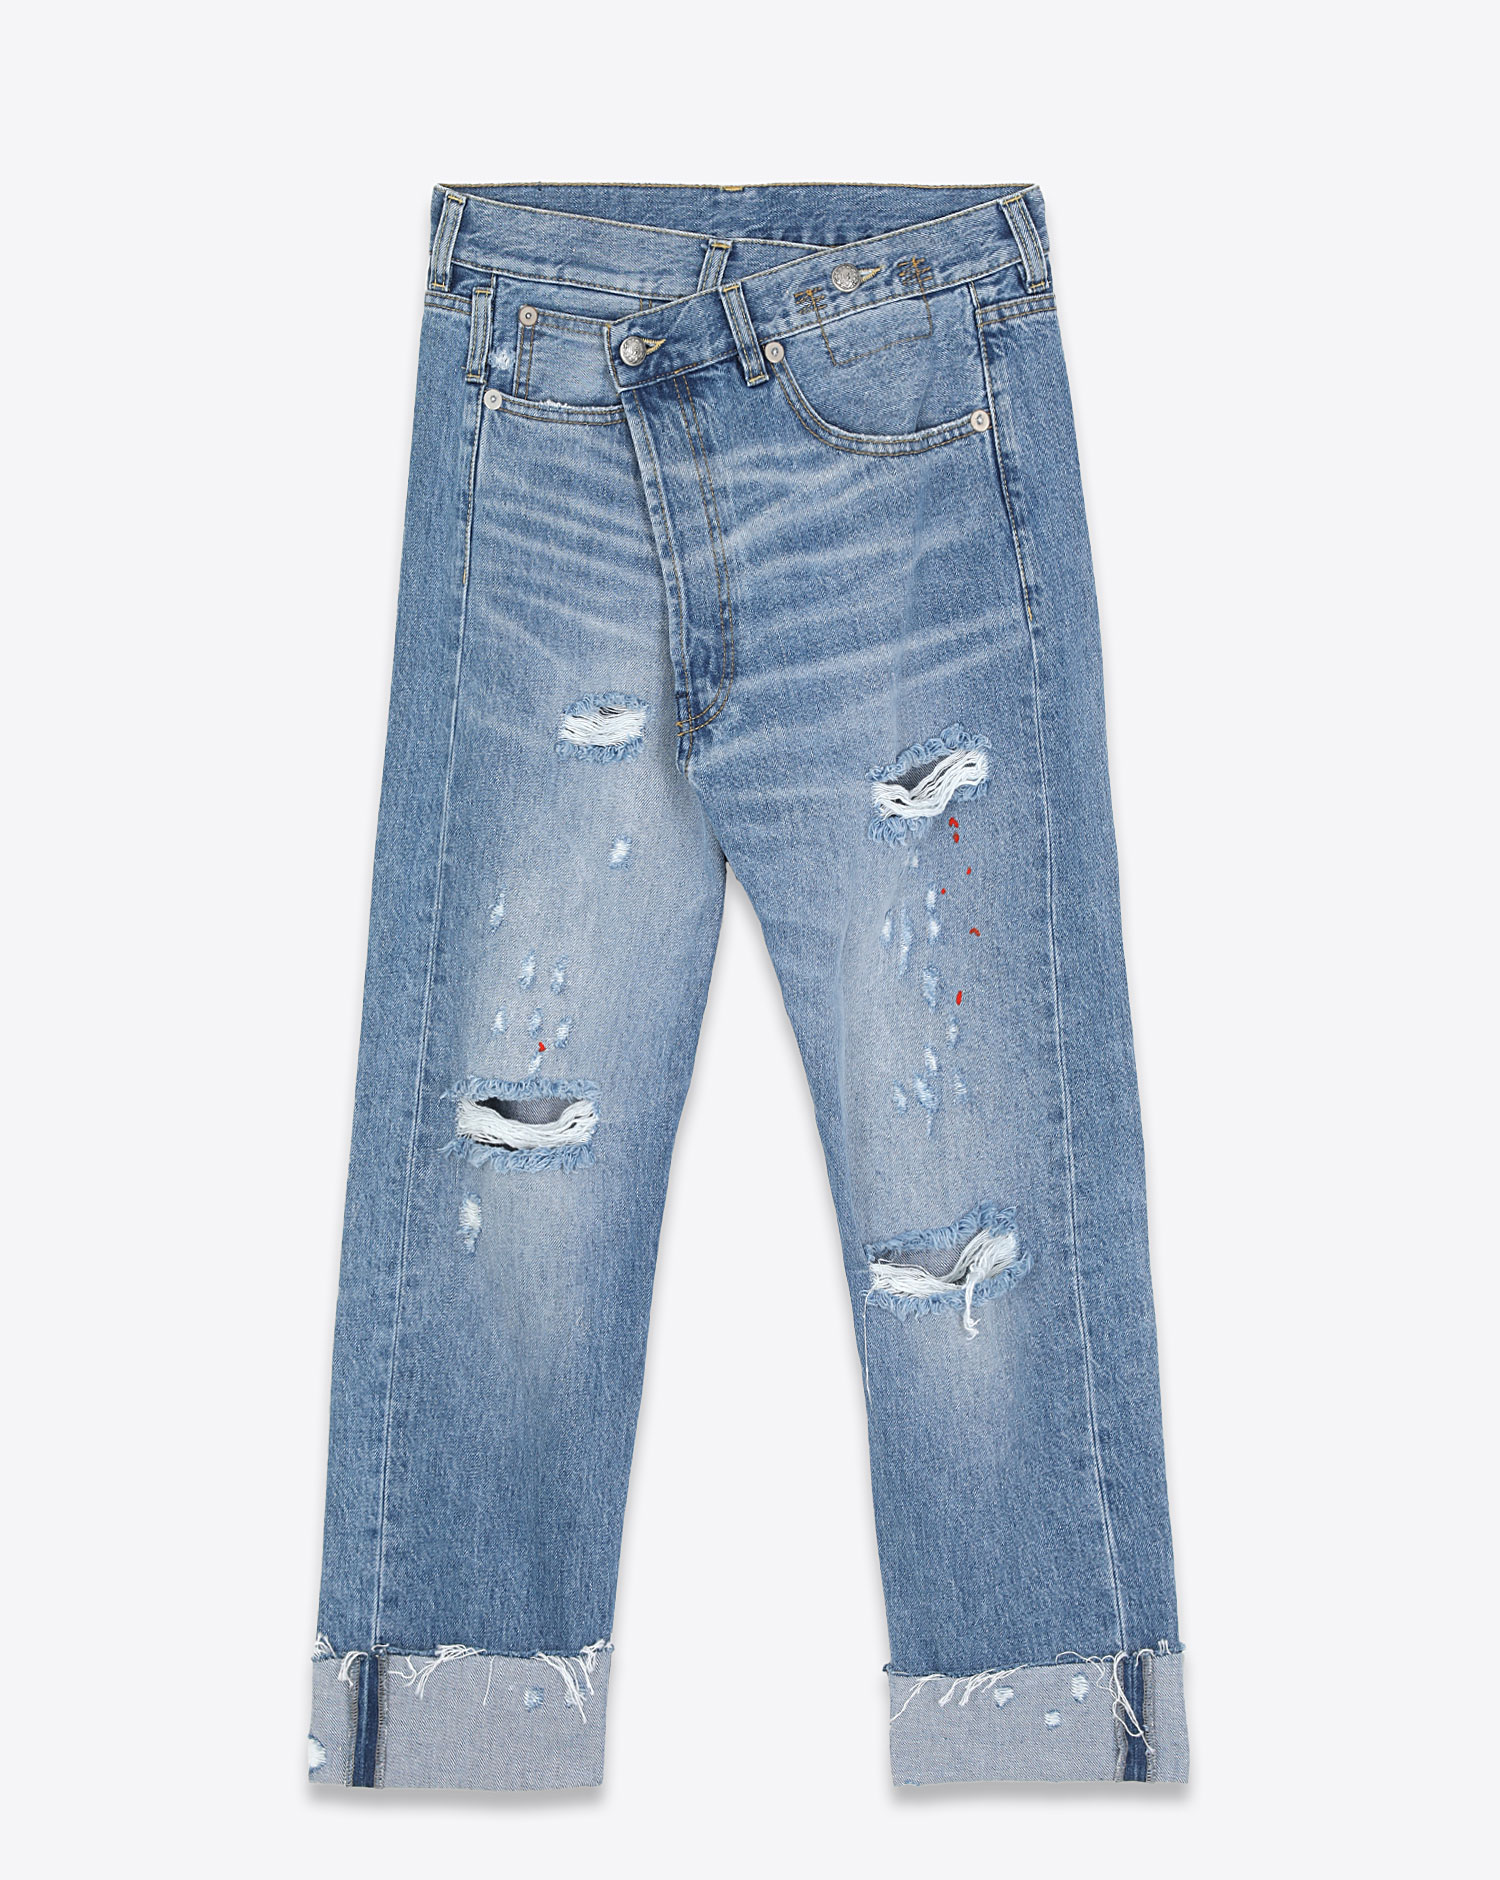 R13 Denim Jeans Crossover Emory. Face.